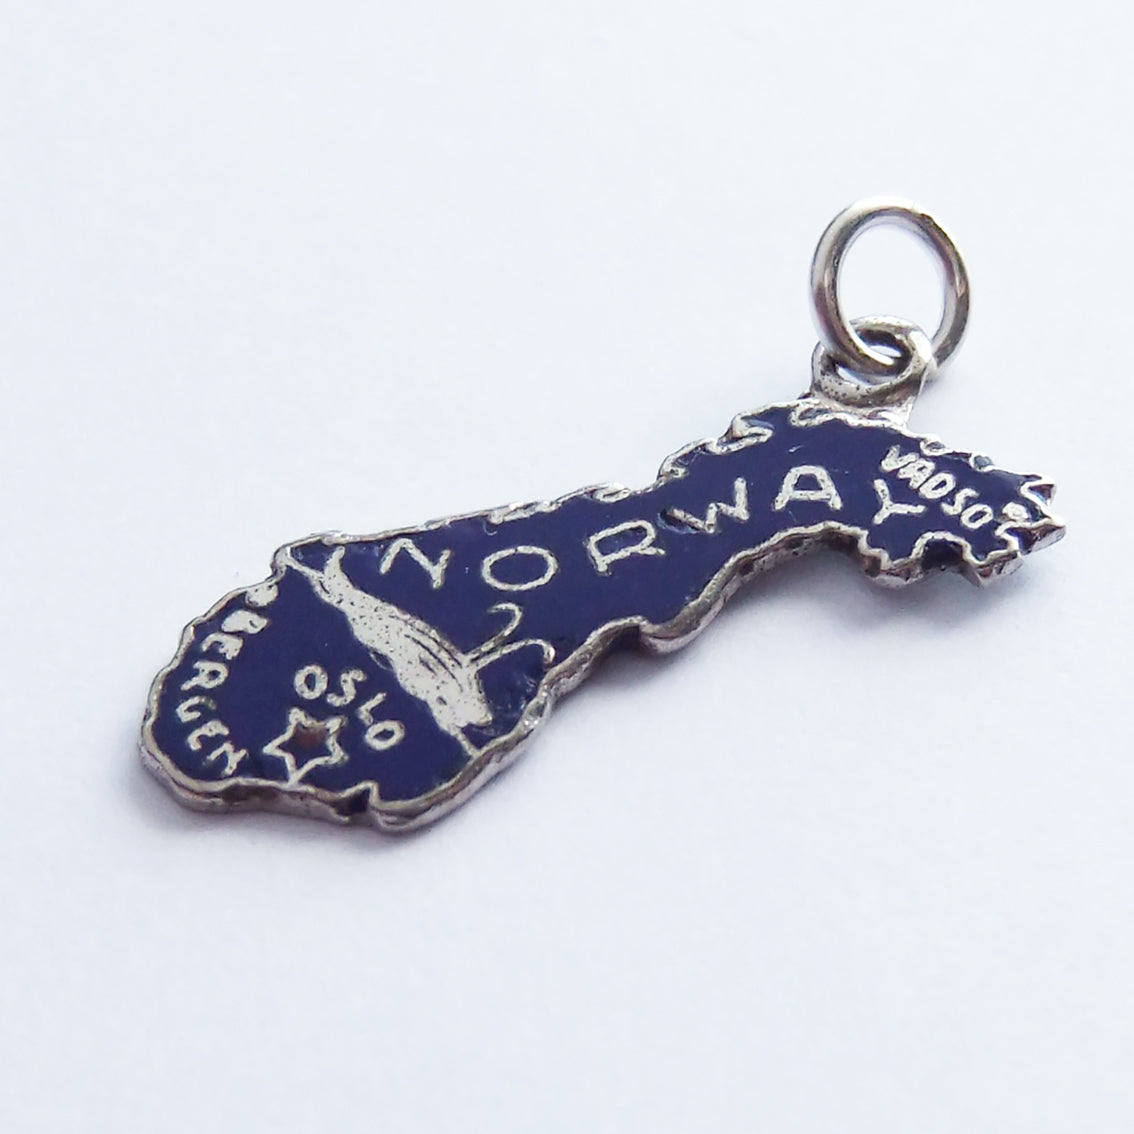 Vintage Norway Map Enamel Sterling Silver Charm by Aetna